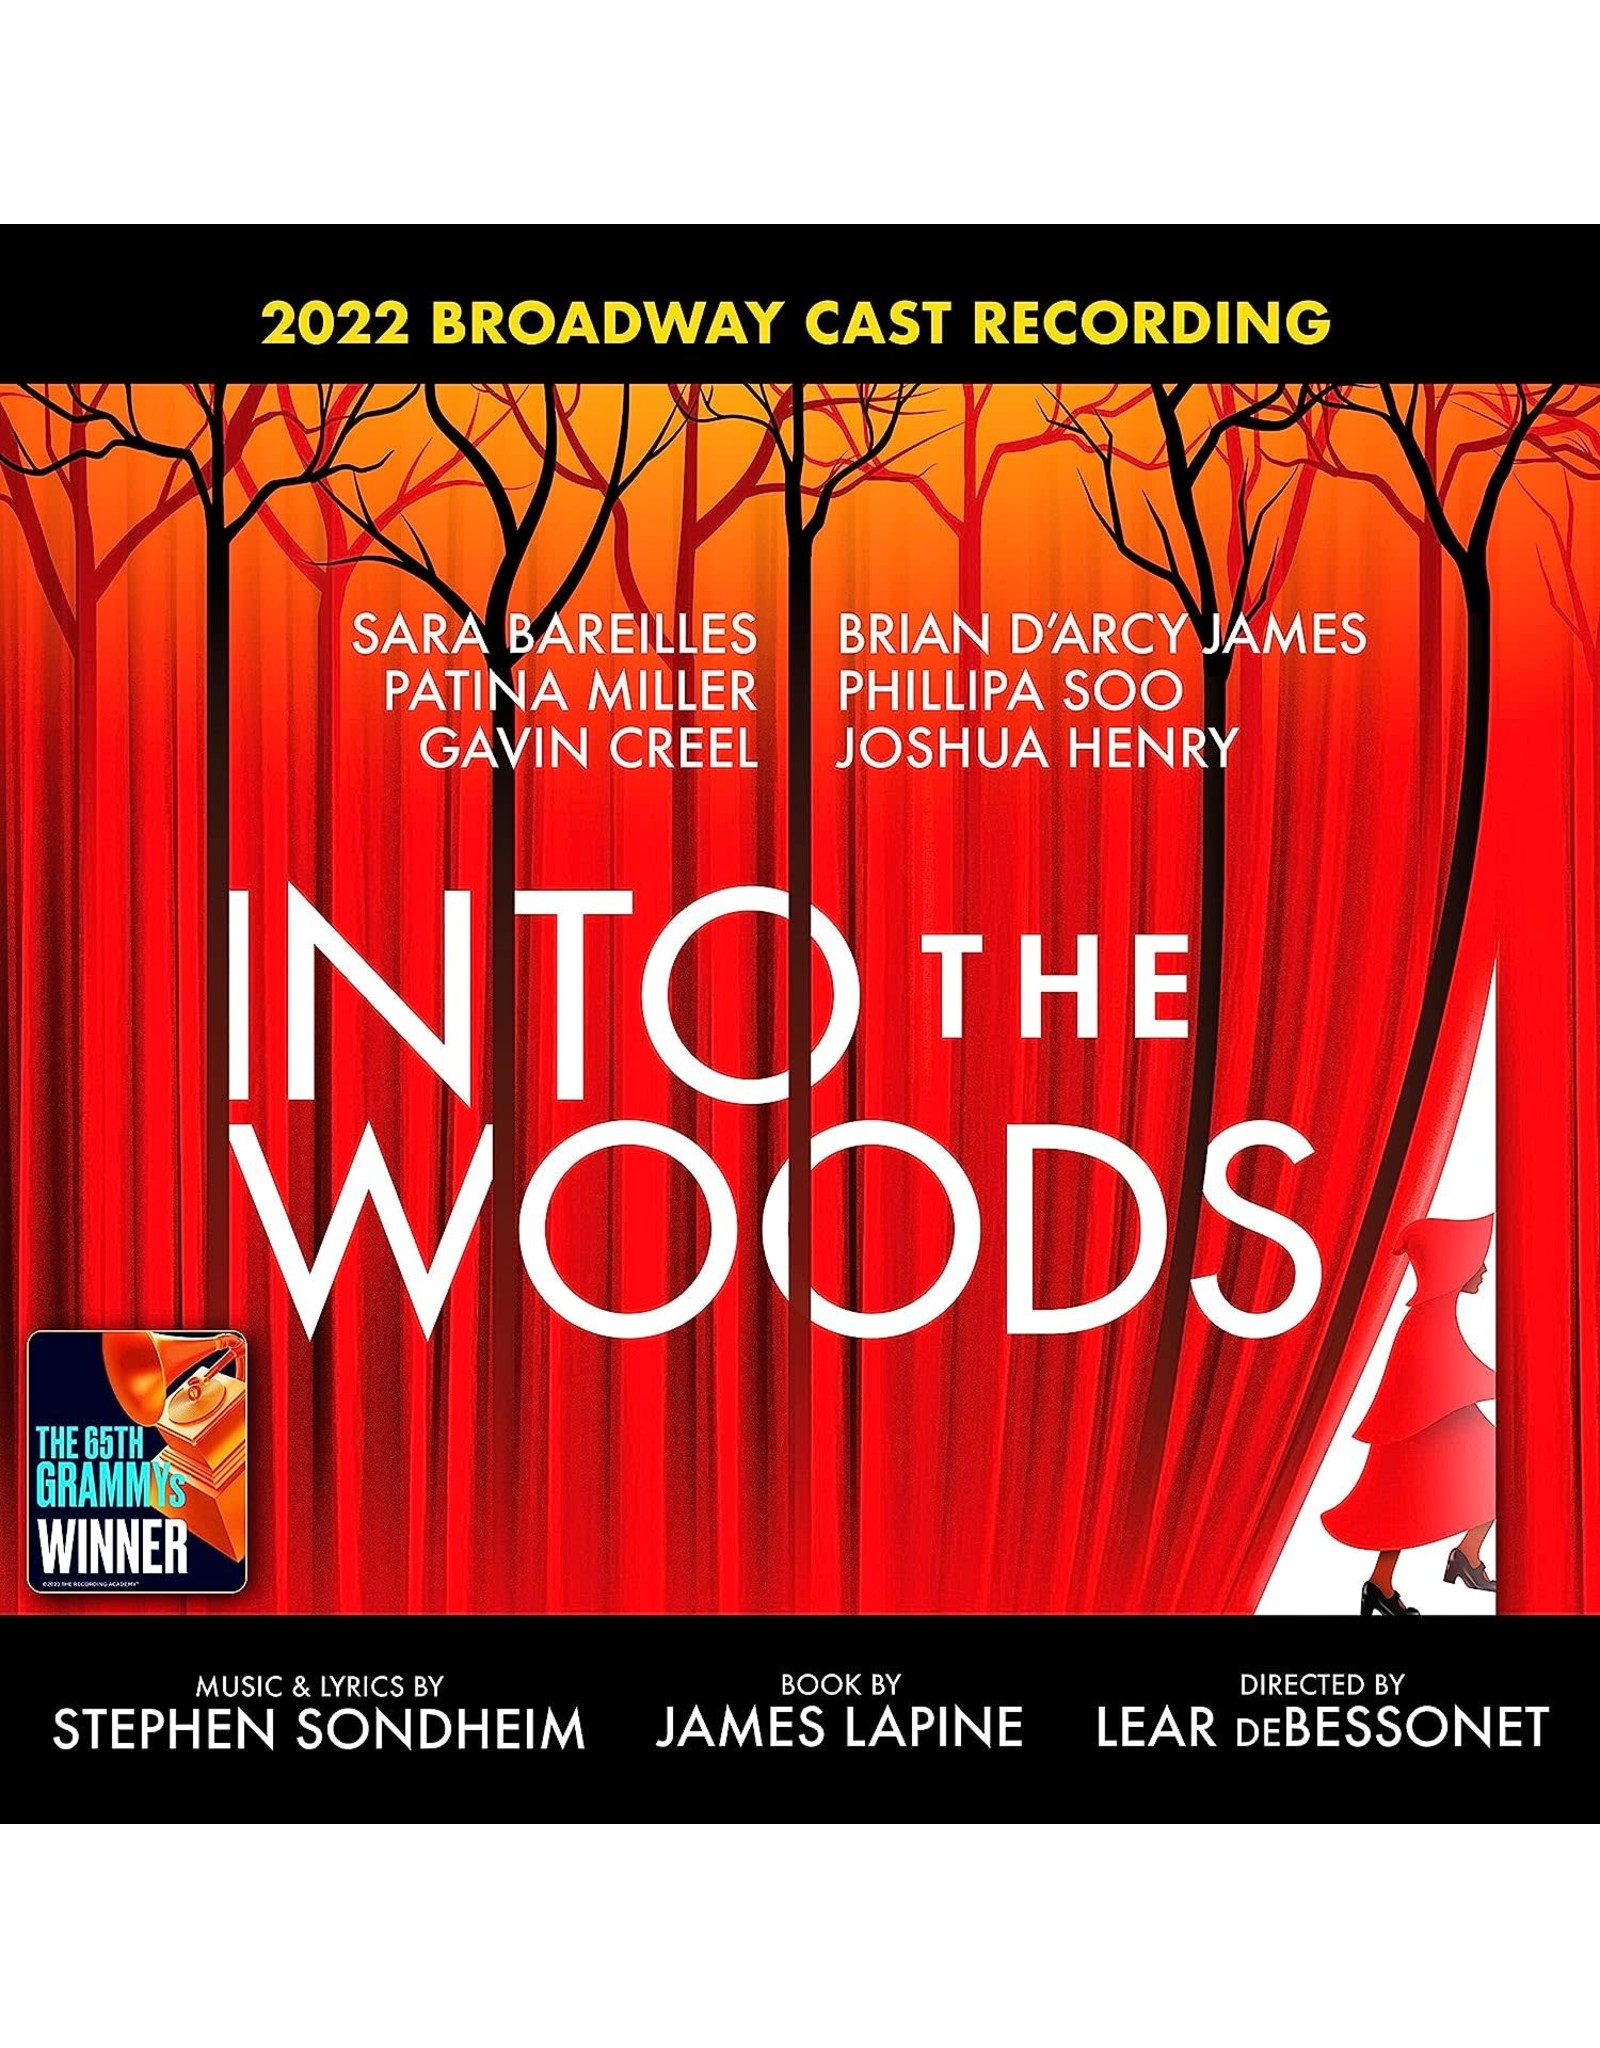 Broadway Cast Recording 2022 - Into The Woods (Red Vinyl)